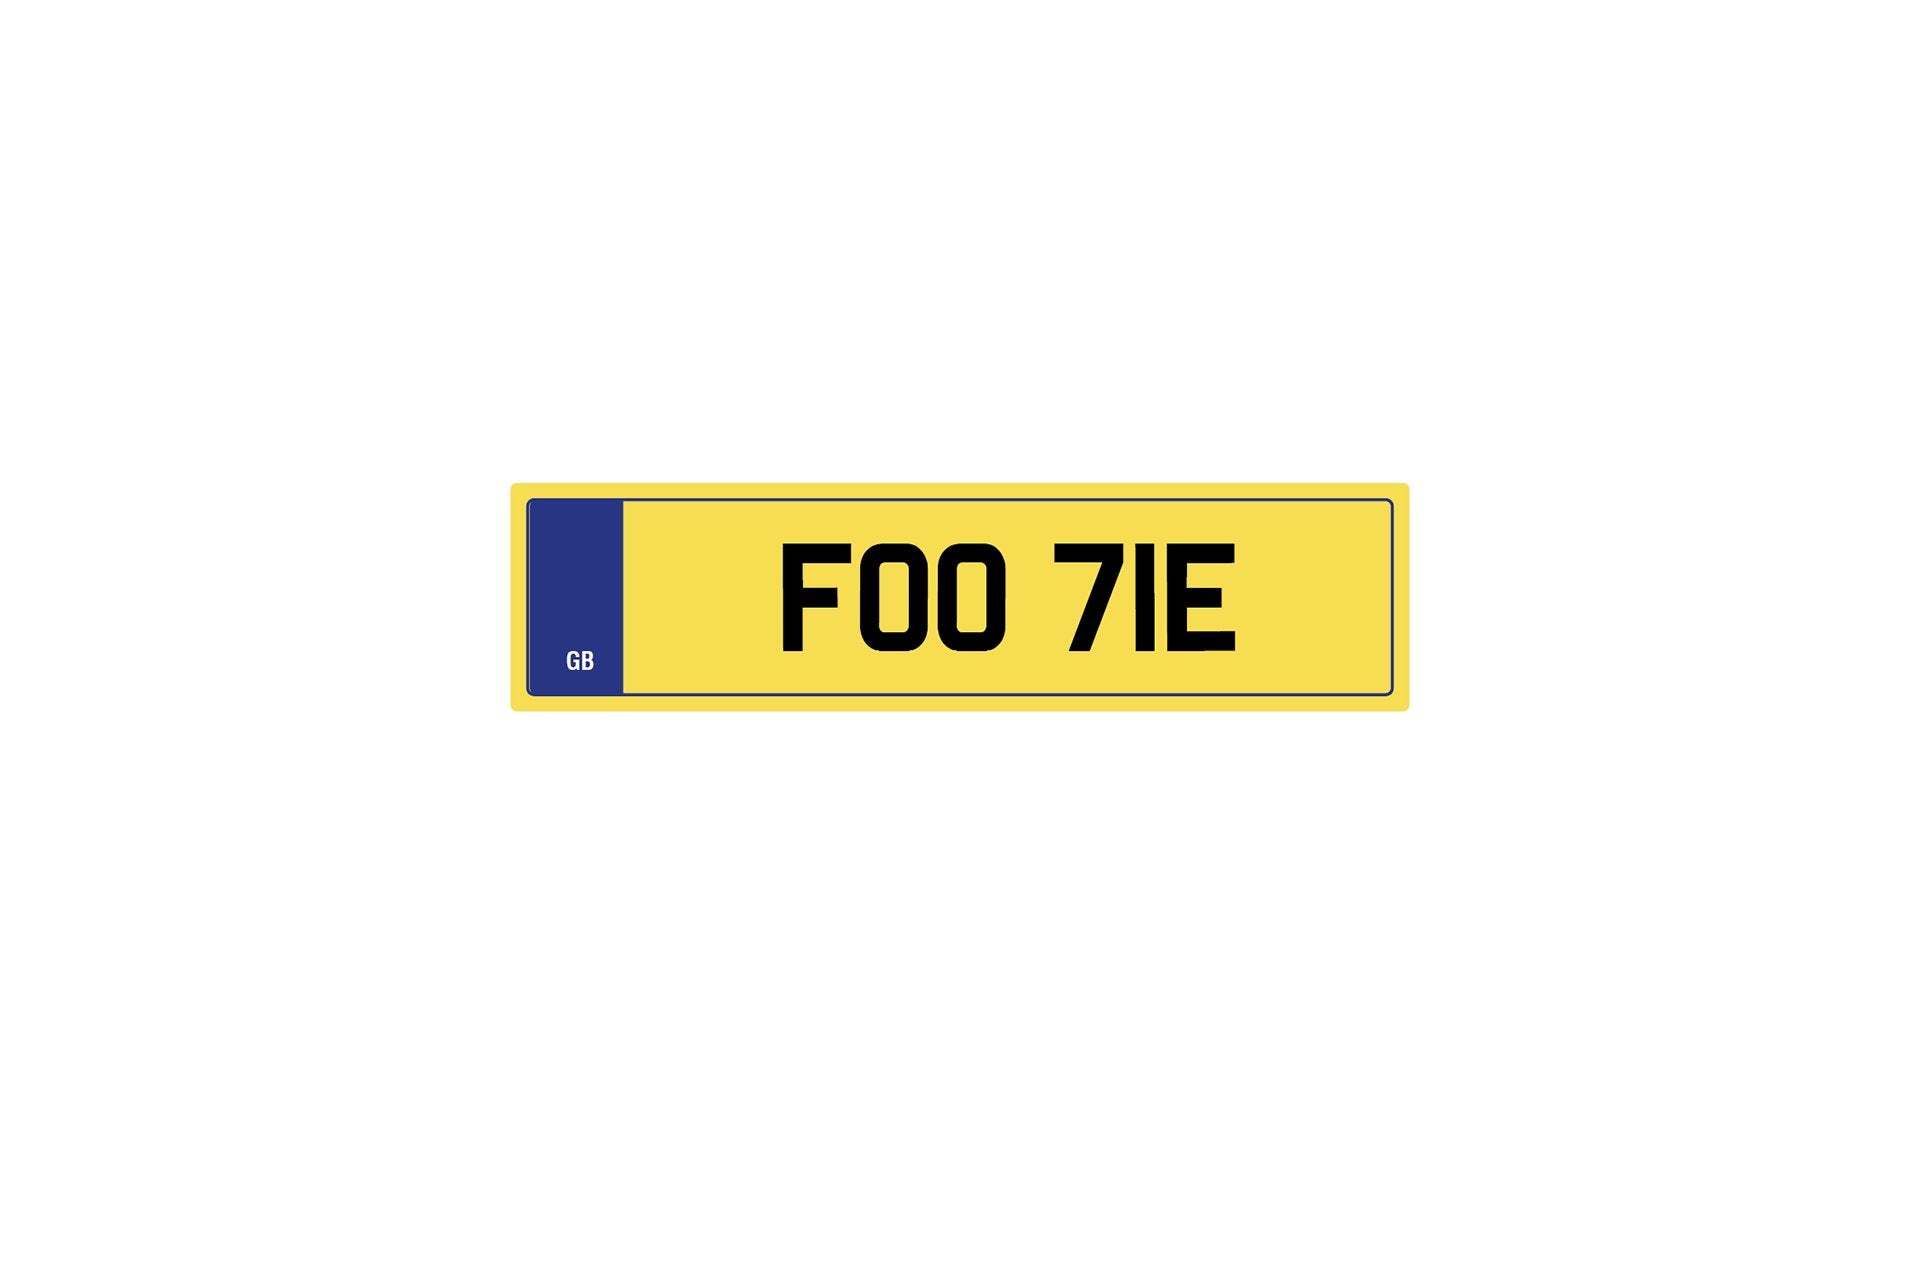 Private Plate F00 7Ie by Kahn - Image 225